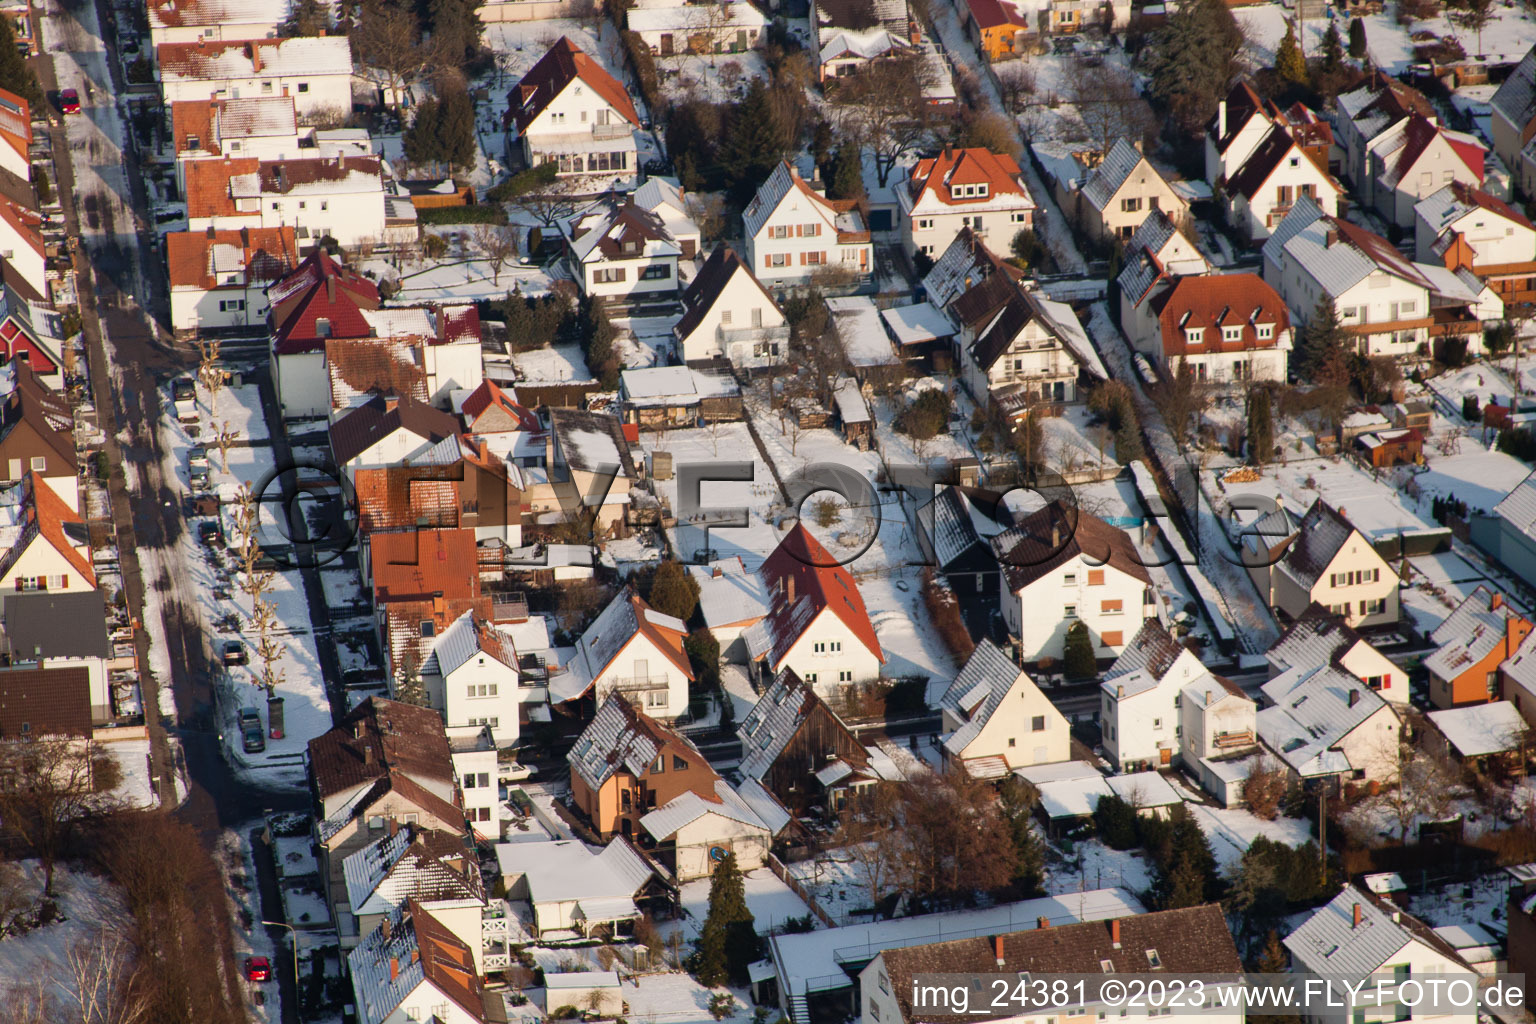 At the Schwanenweier in Kandel in the state Rhineland-Palatinate, Germany seen from above